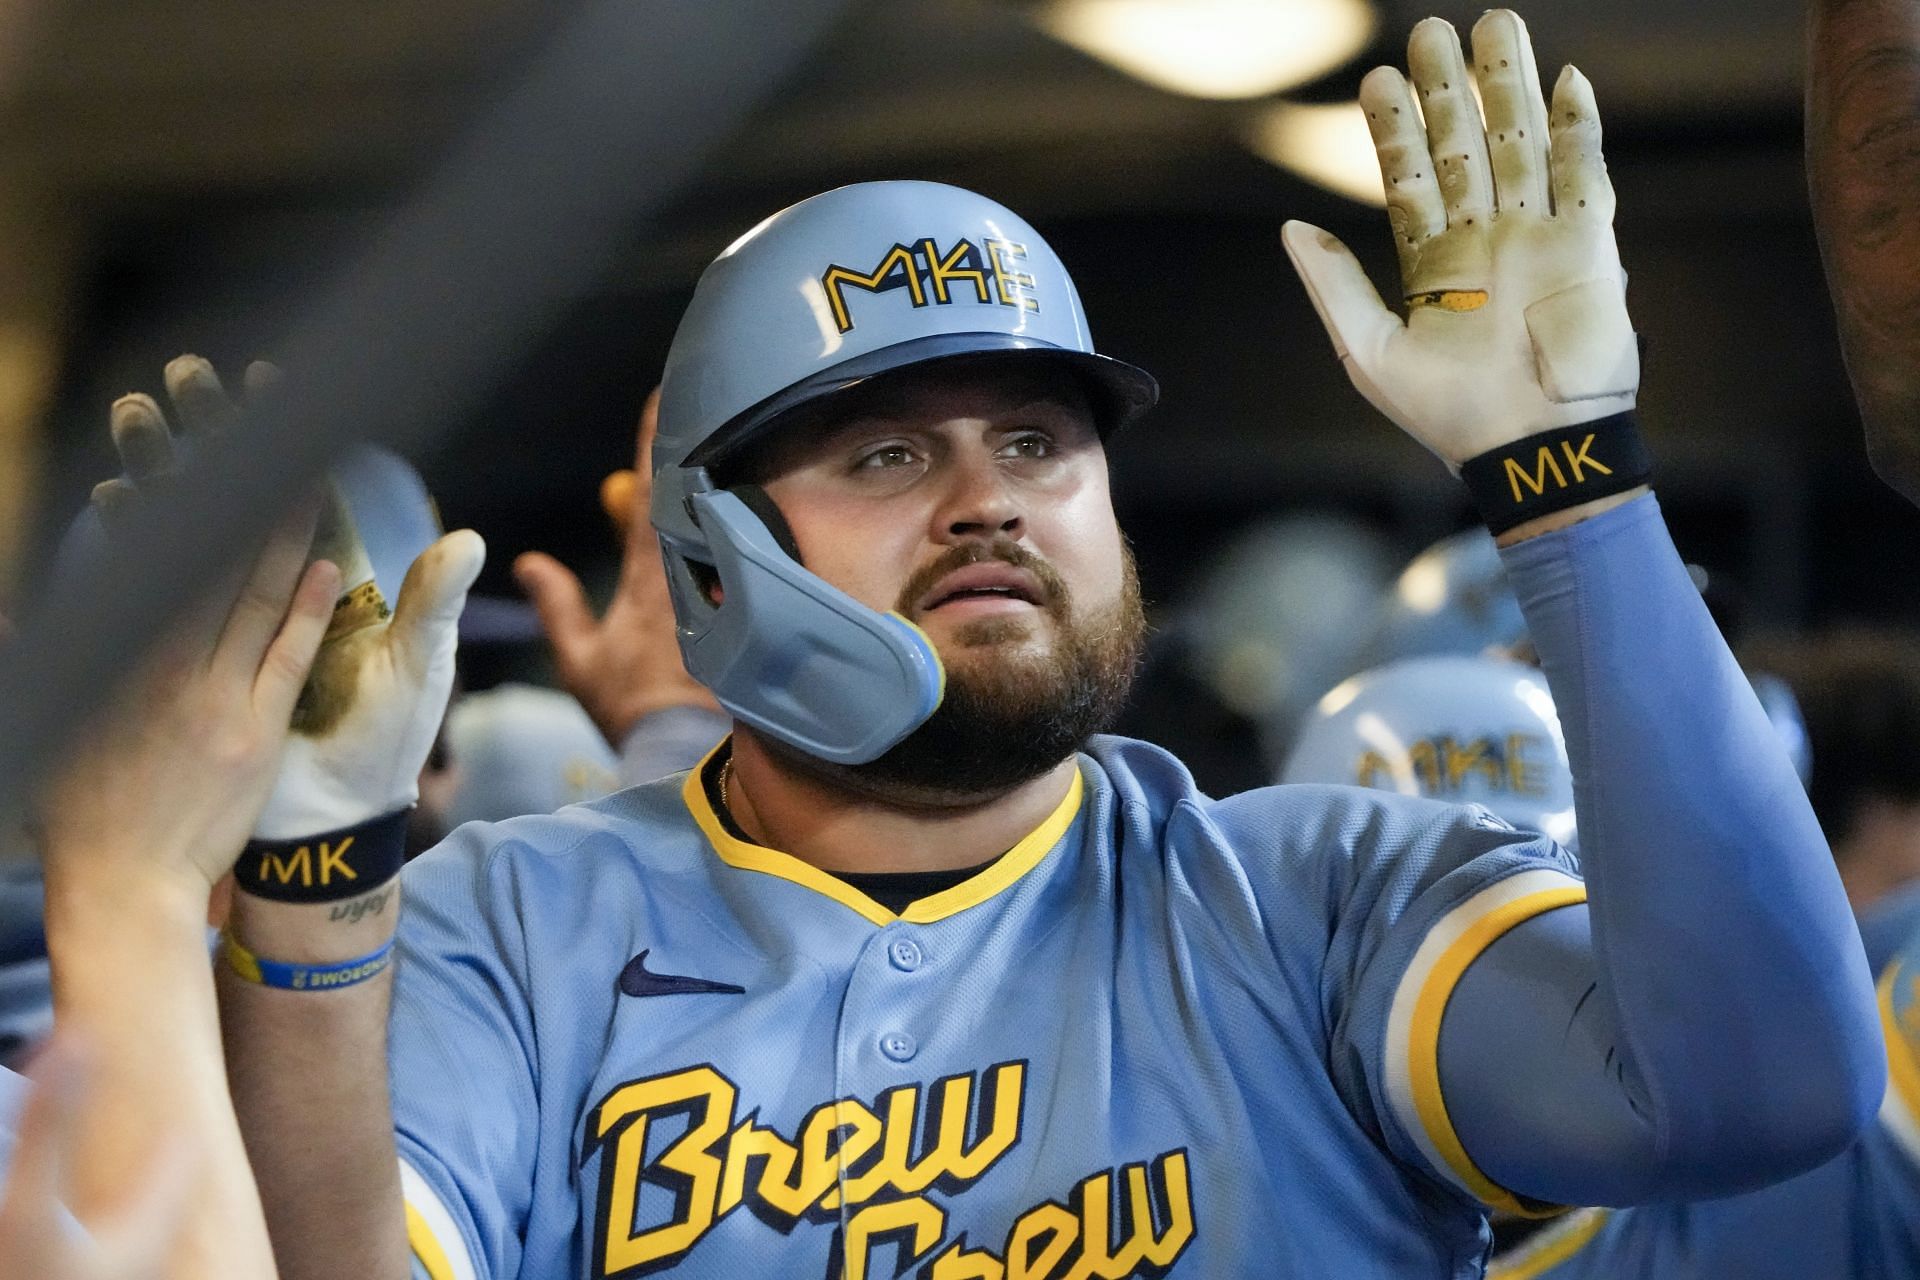 Brewers outfielder Rowdy Tellez says he would have punched fans if